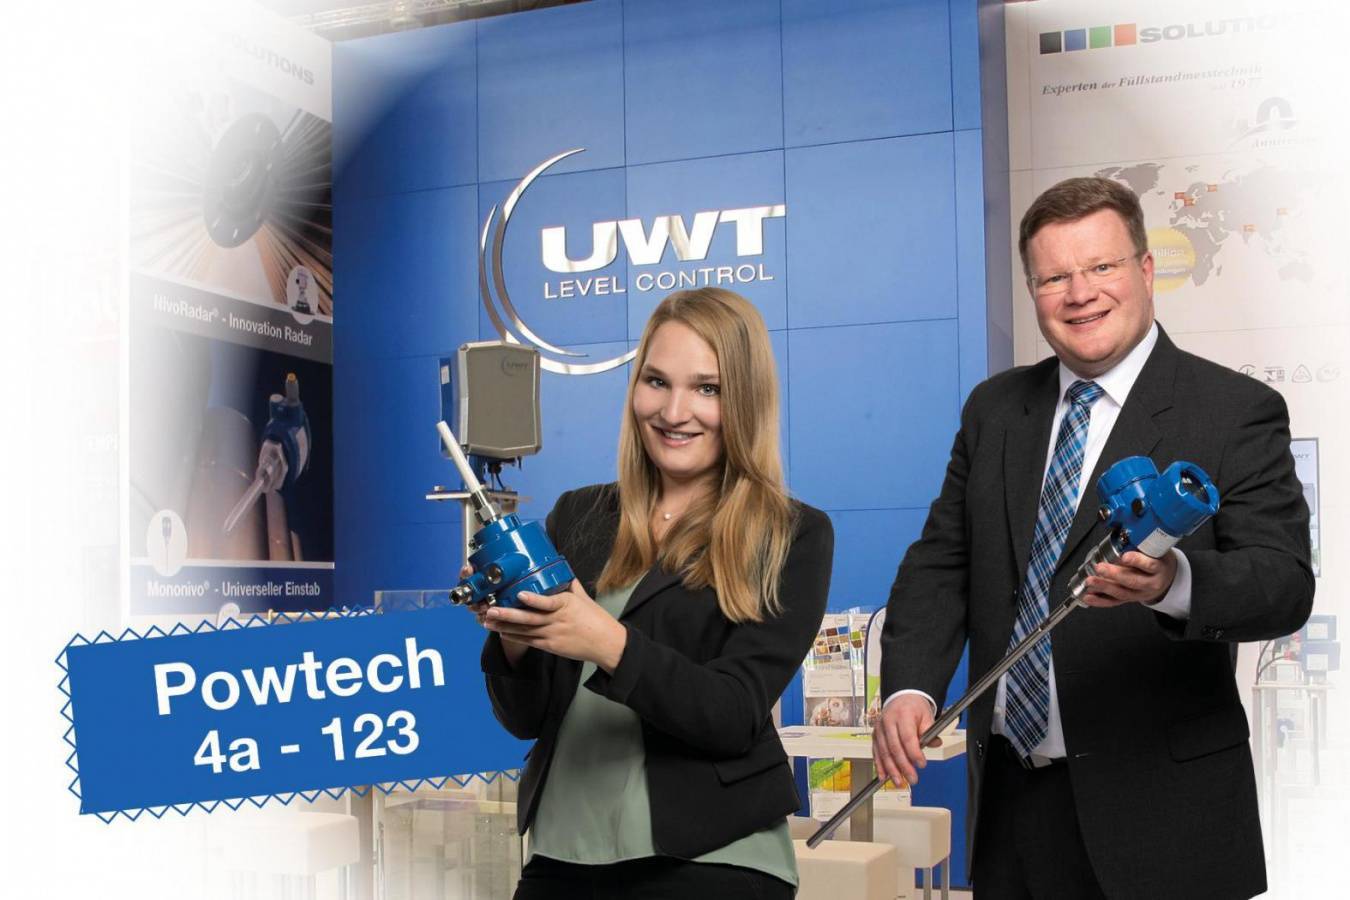 POWTECH 2019 – 3 eventful days await us UWT is looking forward to an exciting exhibition with lots of visitors and discussions